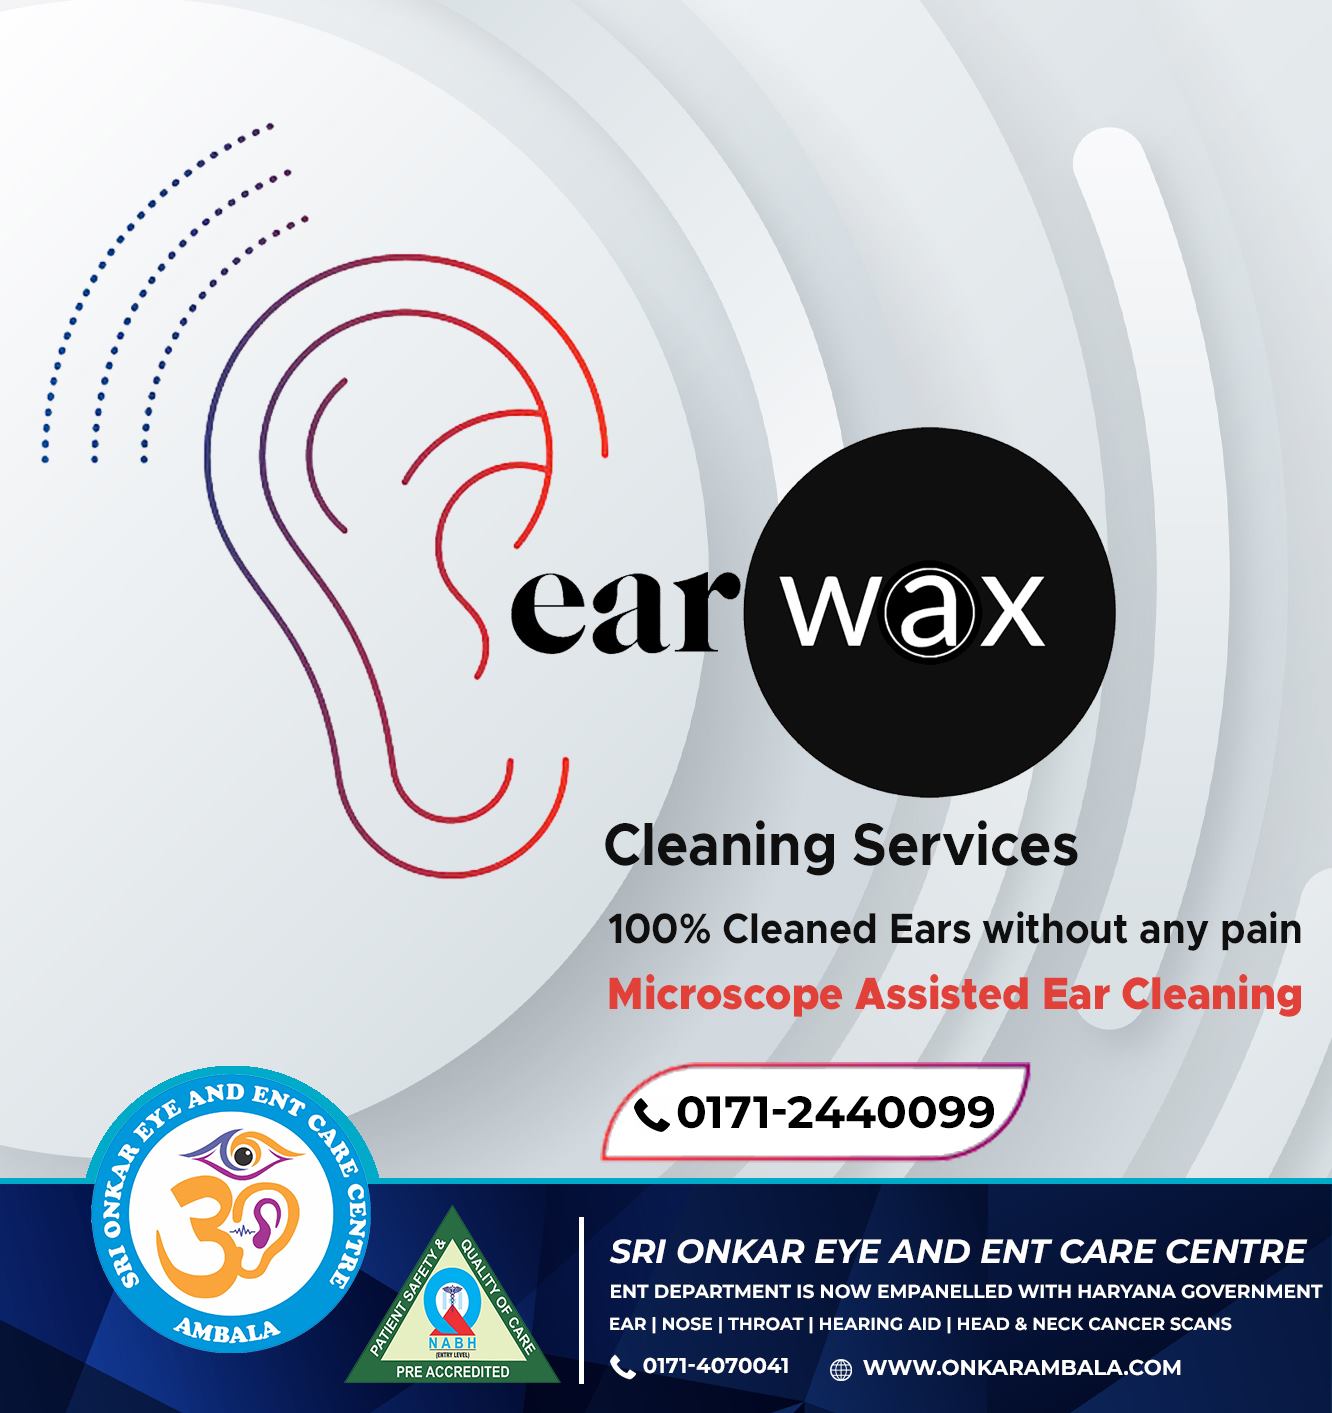 Ear wax removal in Ambala | ENT specialist in Ambala | Sri Onkar Eye & ENT Care Centre